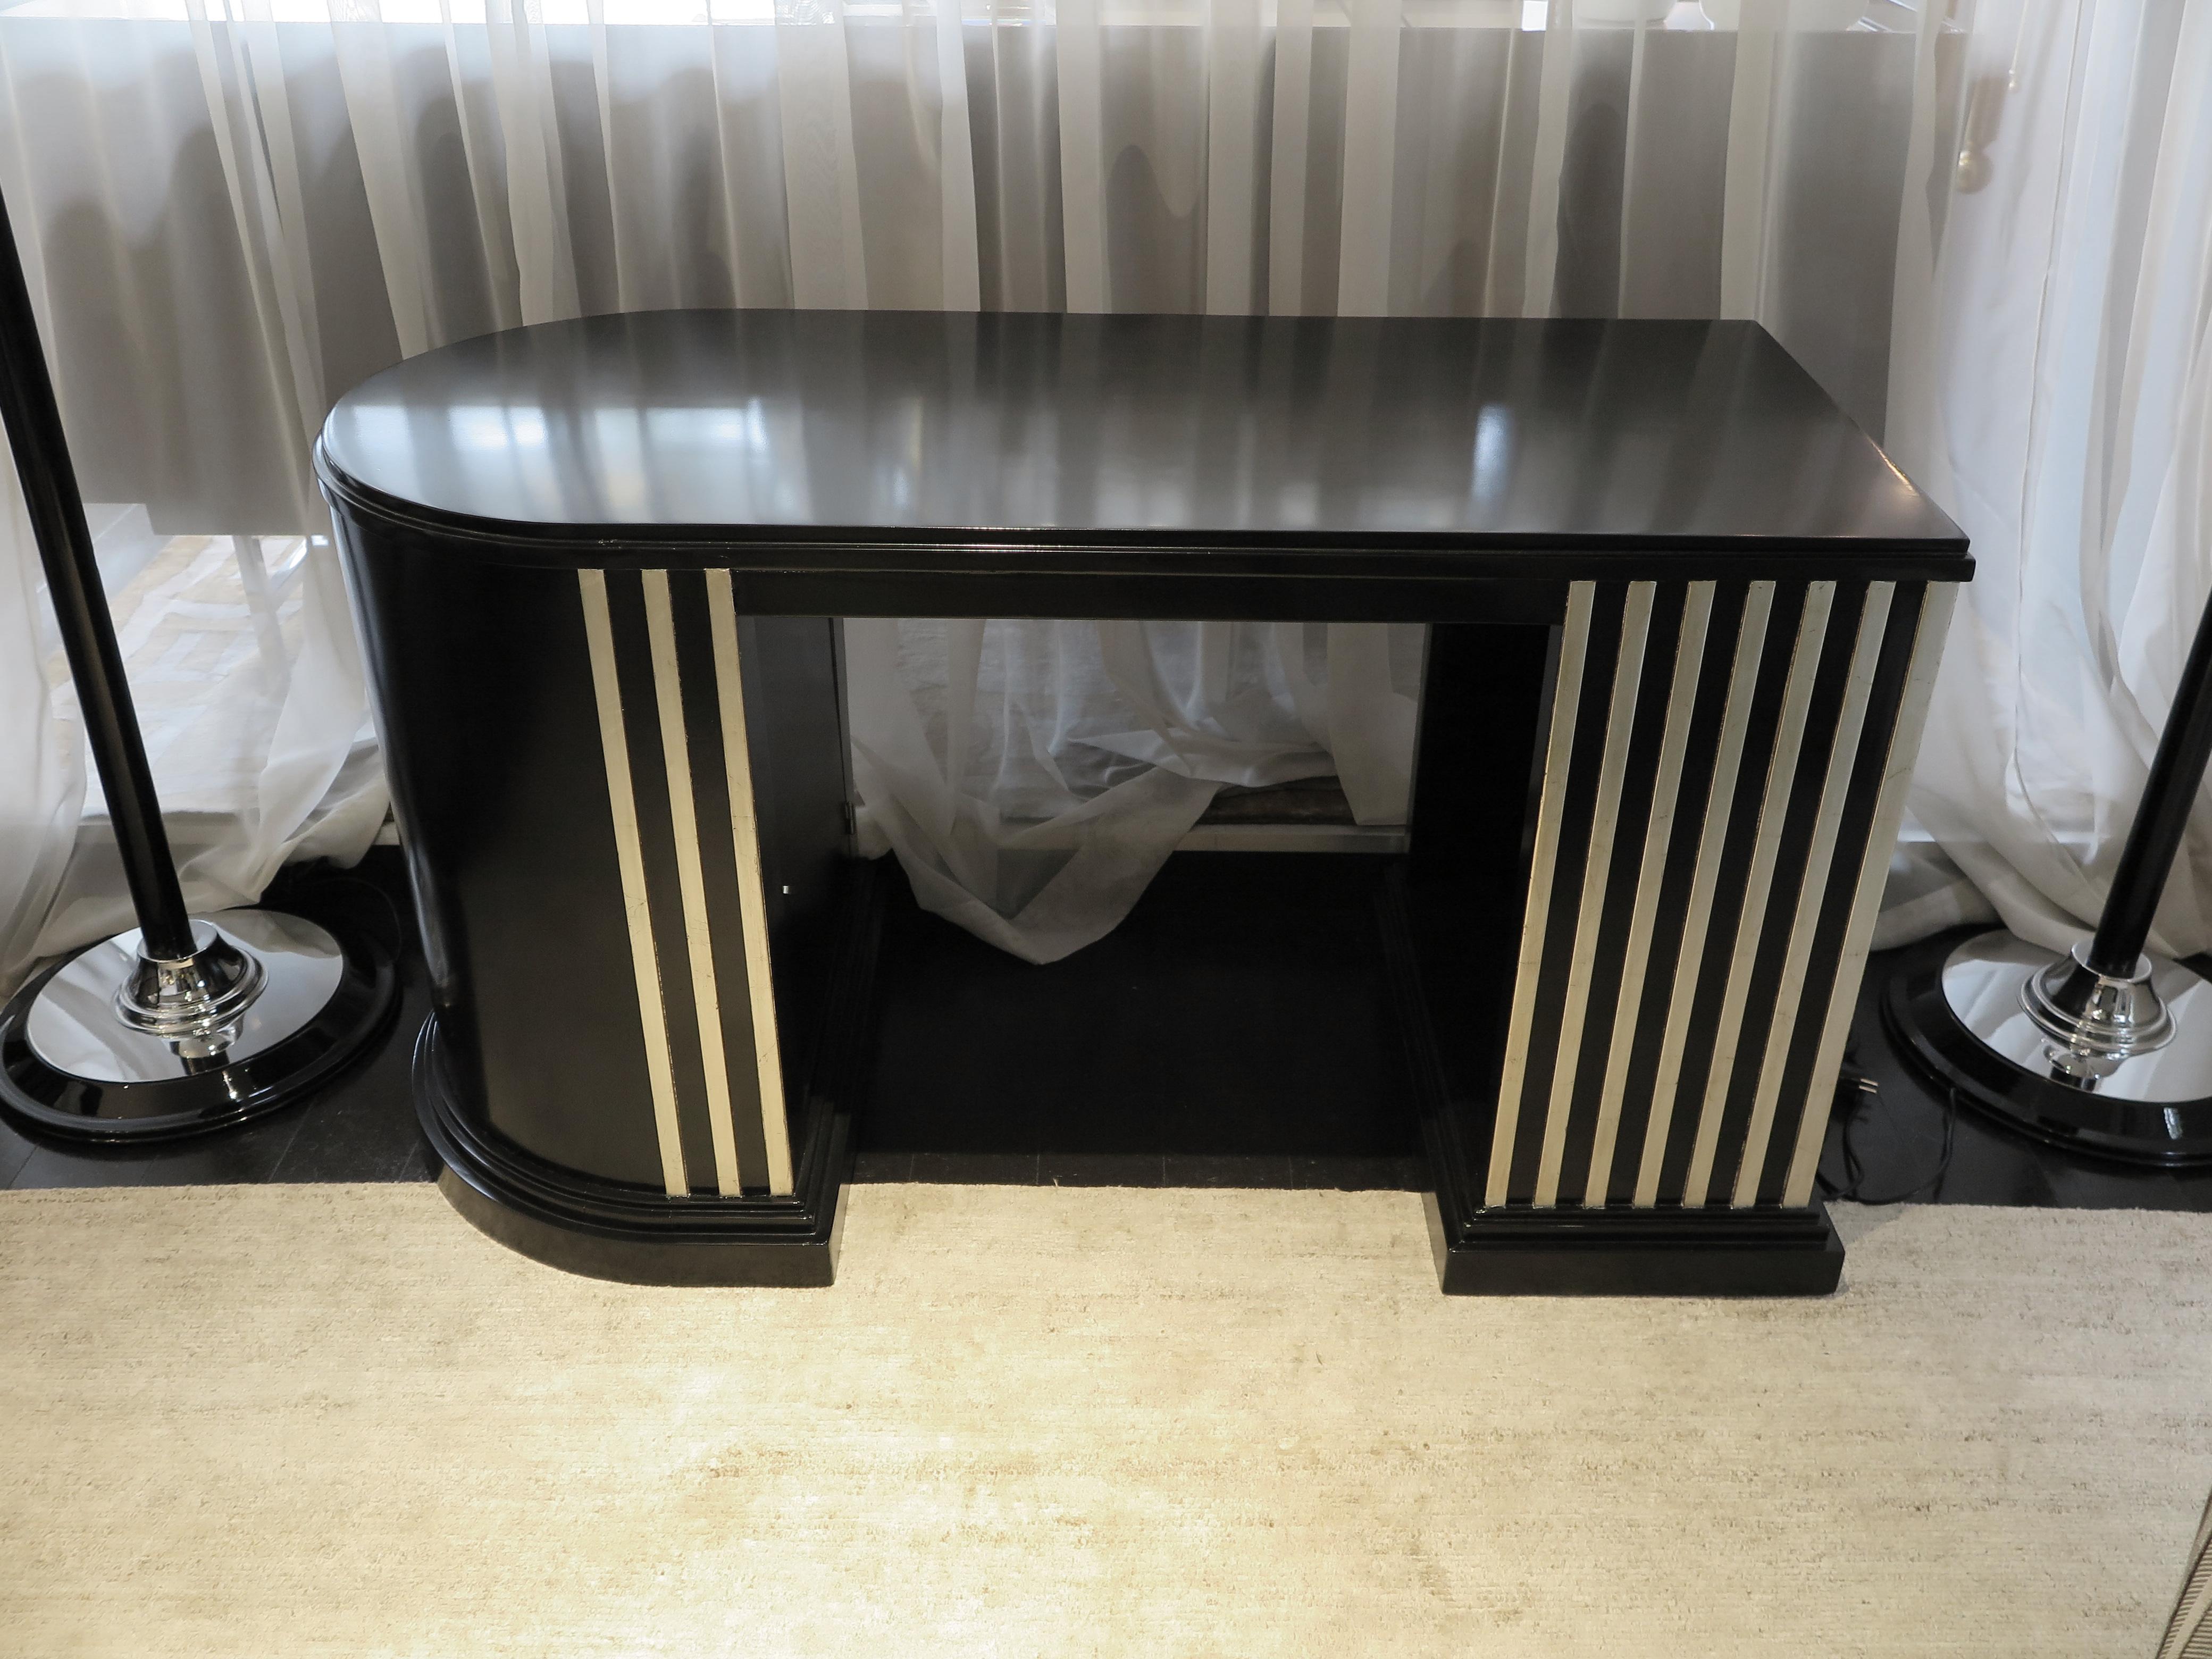 This sleek black lacquer desk features a demilune design. Two pedestal bases one rectangular and one curved. A hidden door compartment fits inside the curved leg. Raised white-gold leaf linear details decorate the desk on both sides.